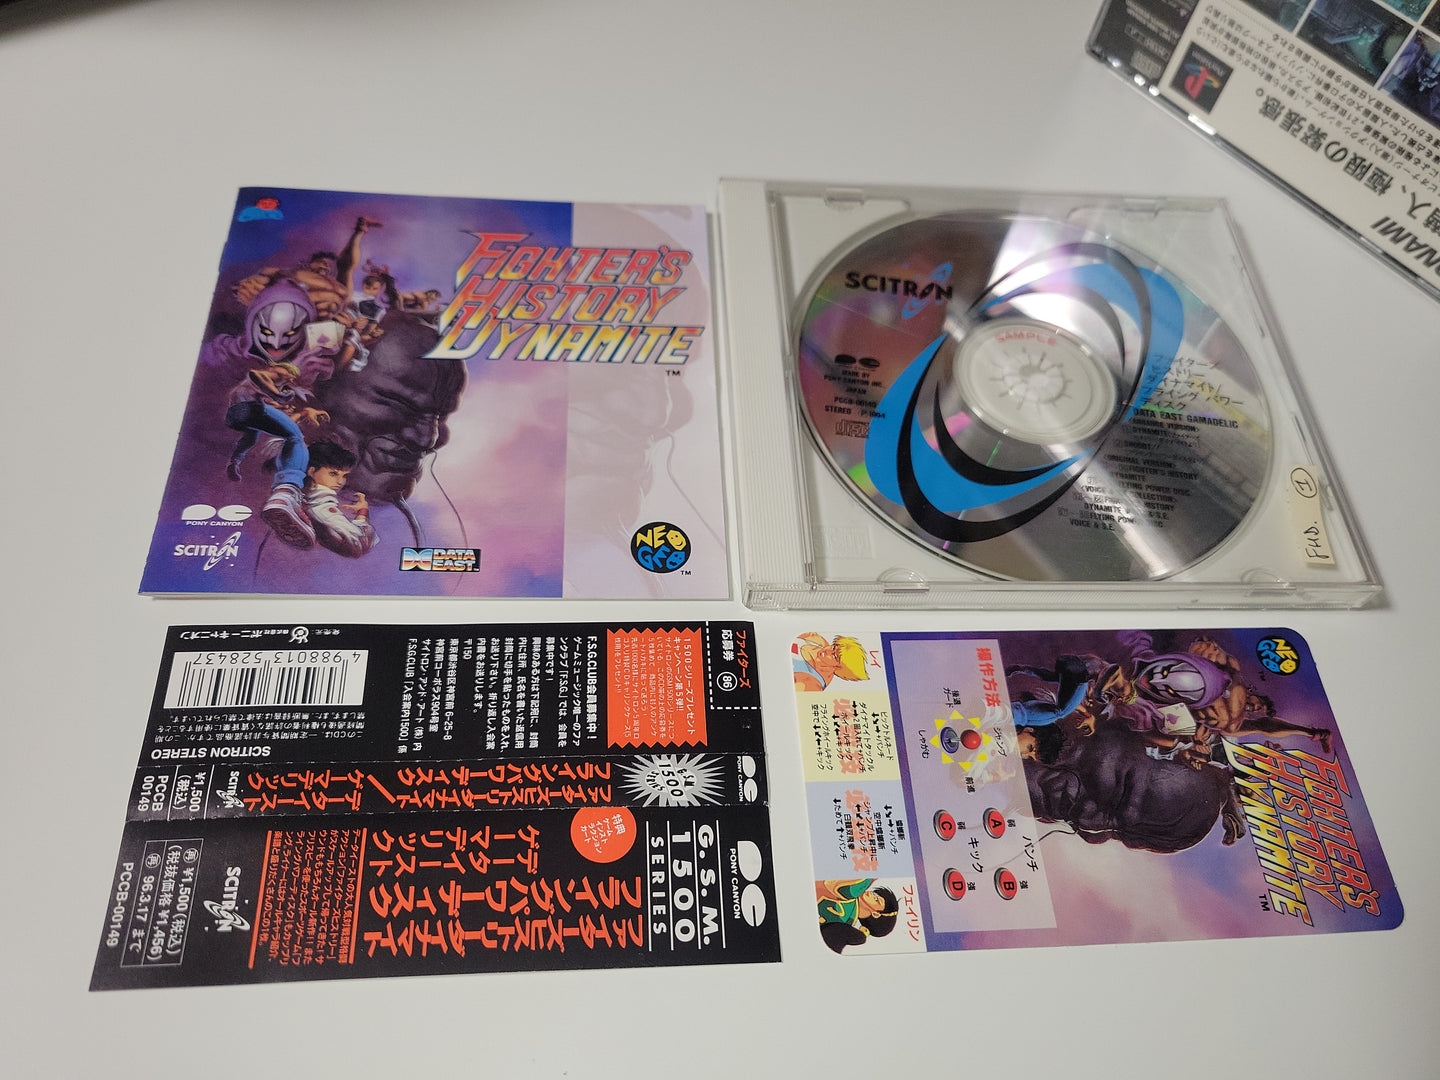 FIGHTER'S HISTORY DYNAMITE / FLYING POWER DISC - Music cd soundtrack